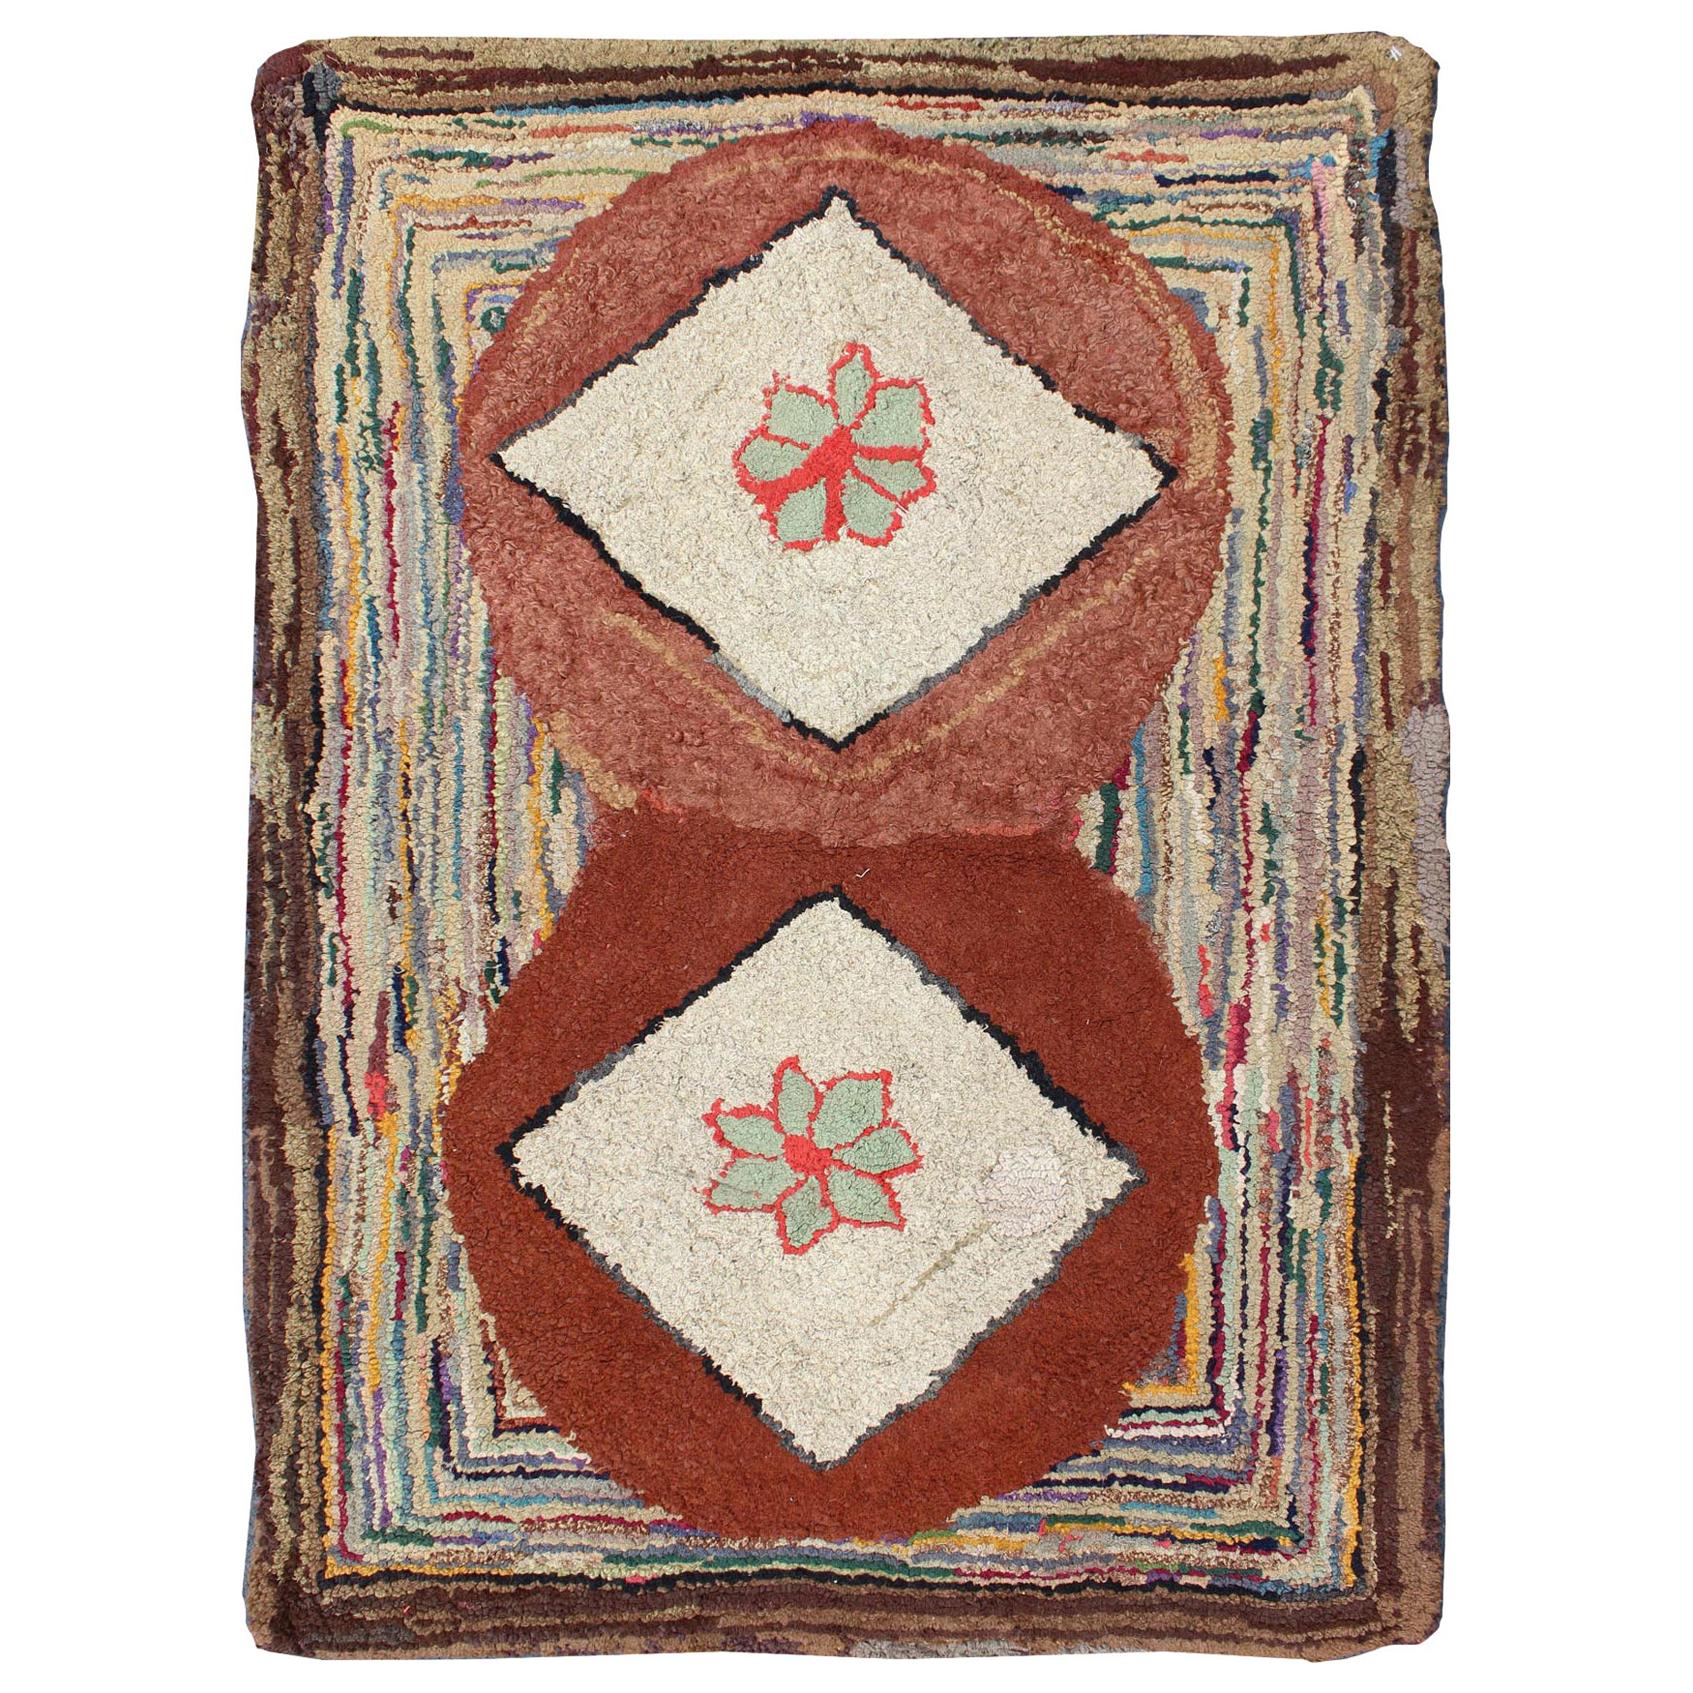 Very Unique Antique Multicolor American Hooked Rug in Diamond Stripes For Sale